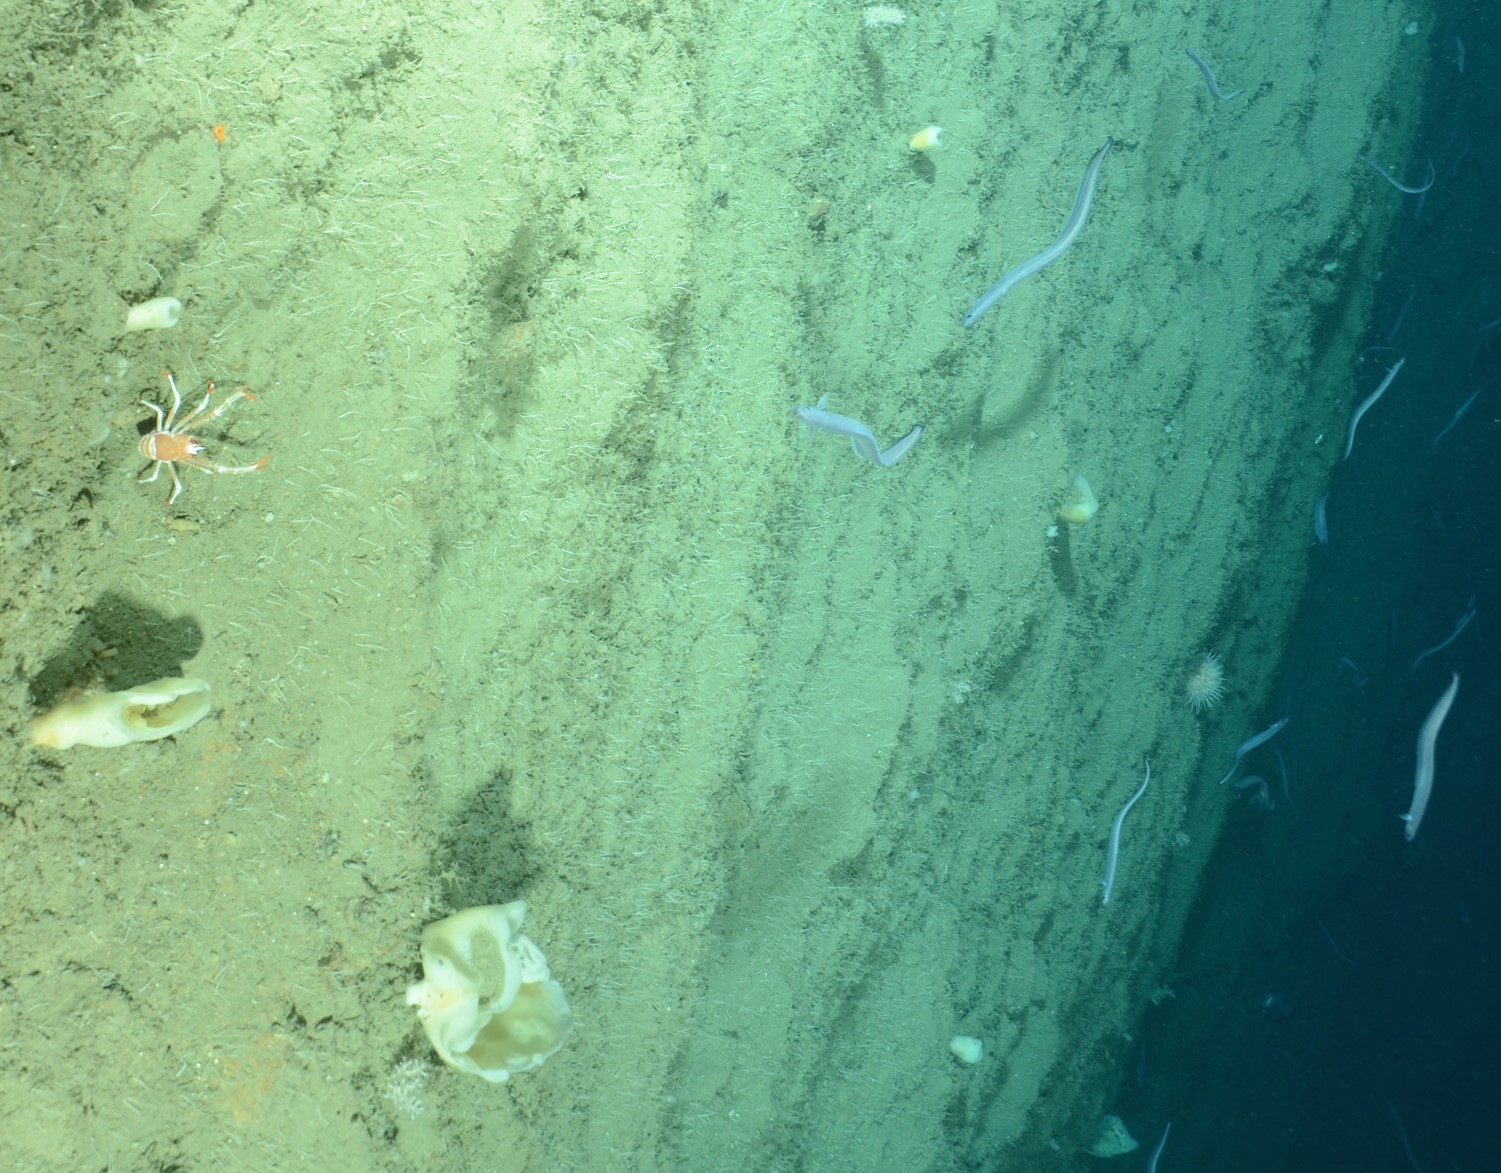 White hexactinellid sponges, galatheid crabs, white urchins and eels over soft sediment margin in Accomac Canyon